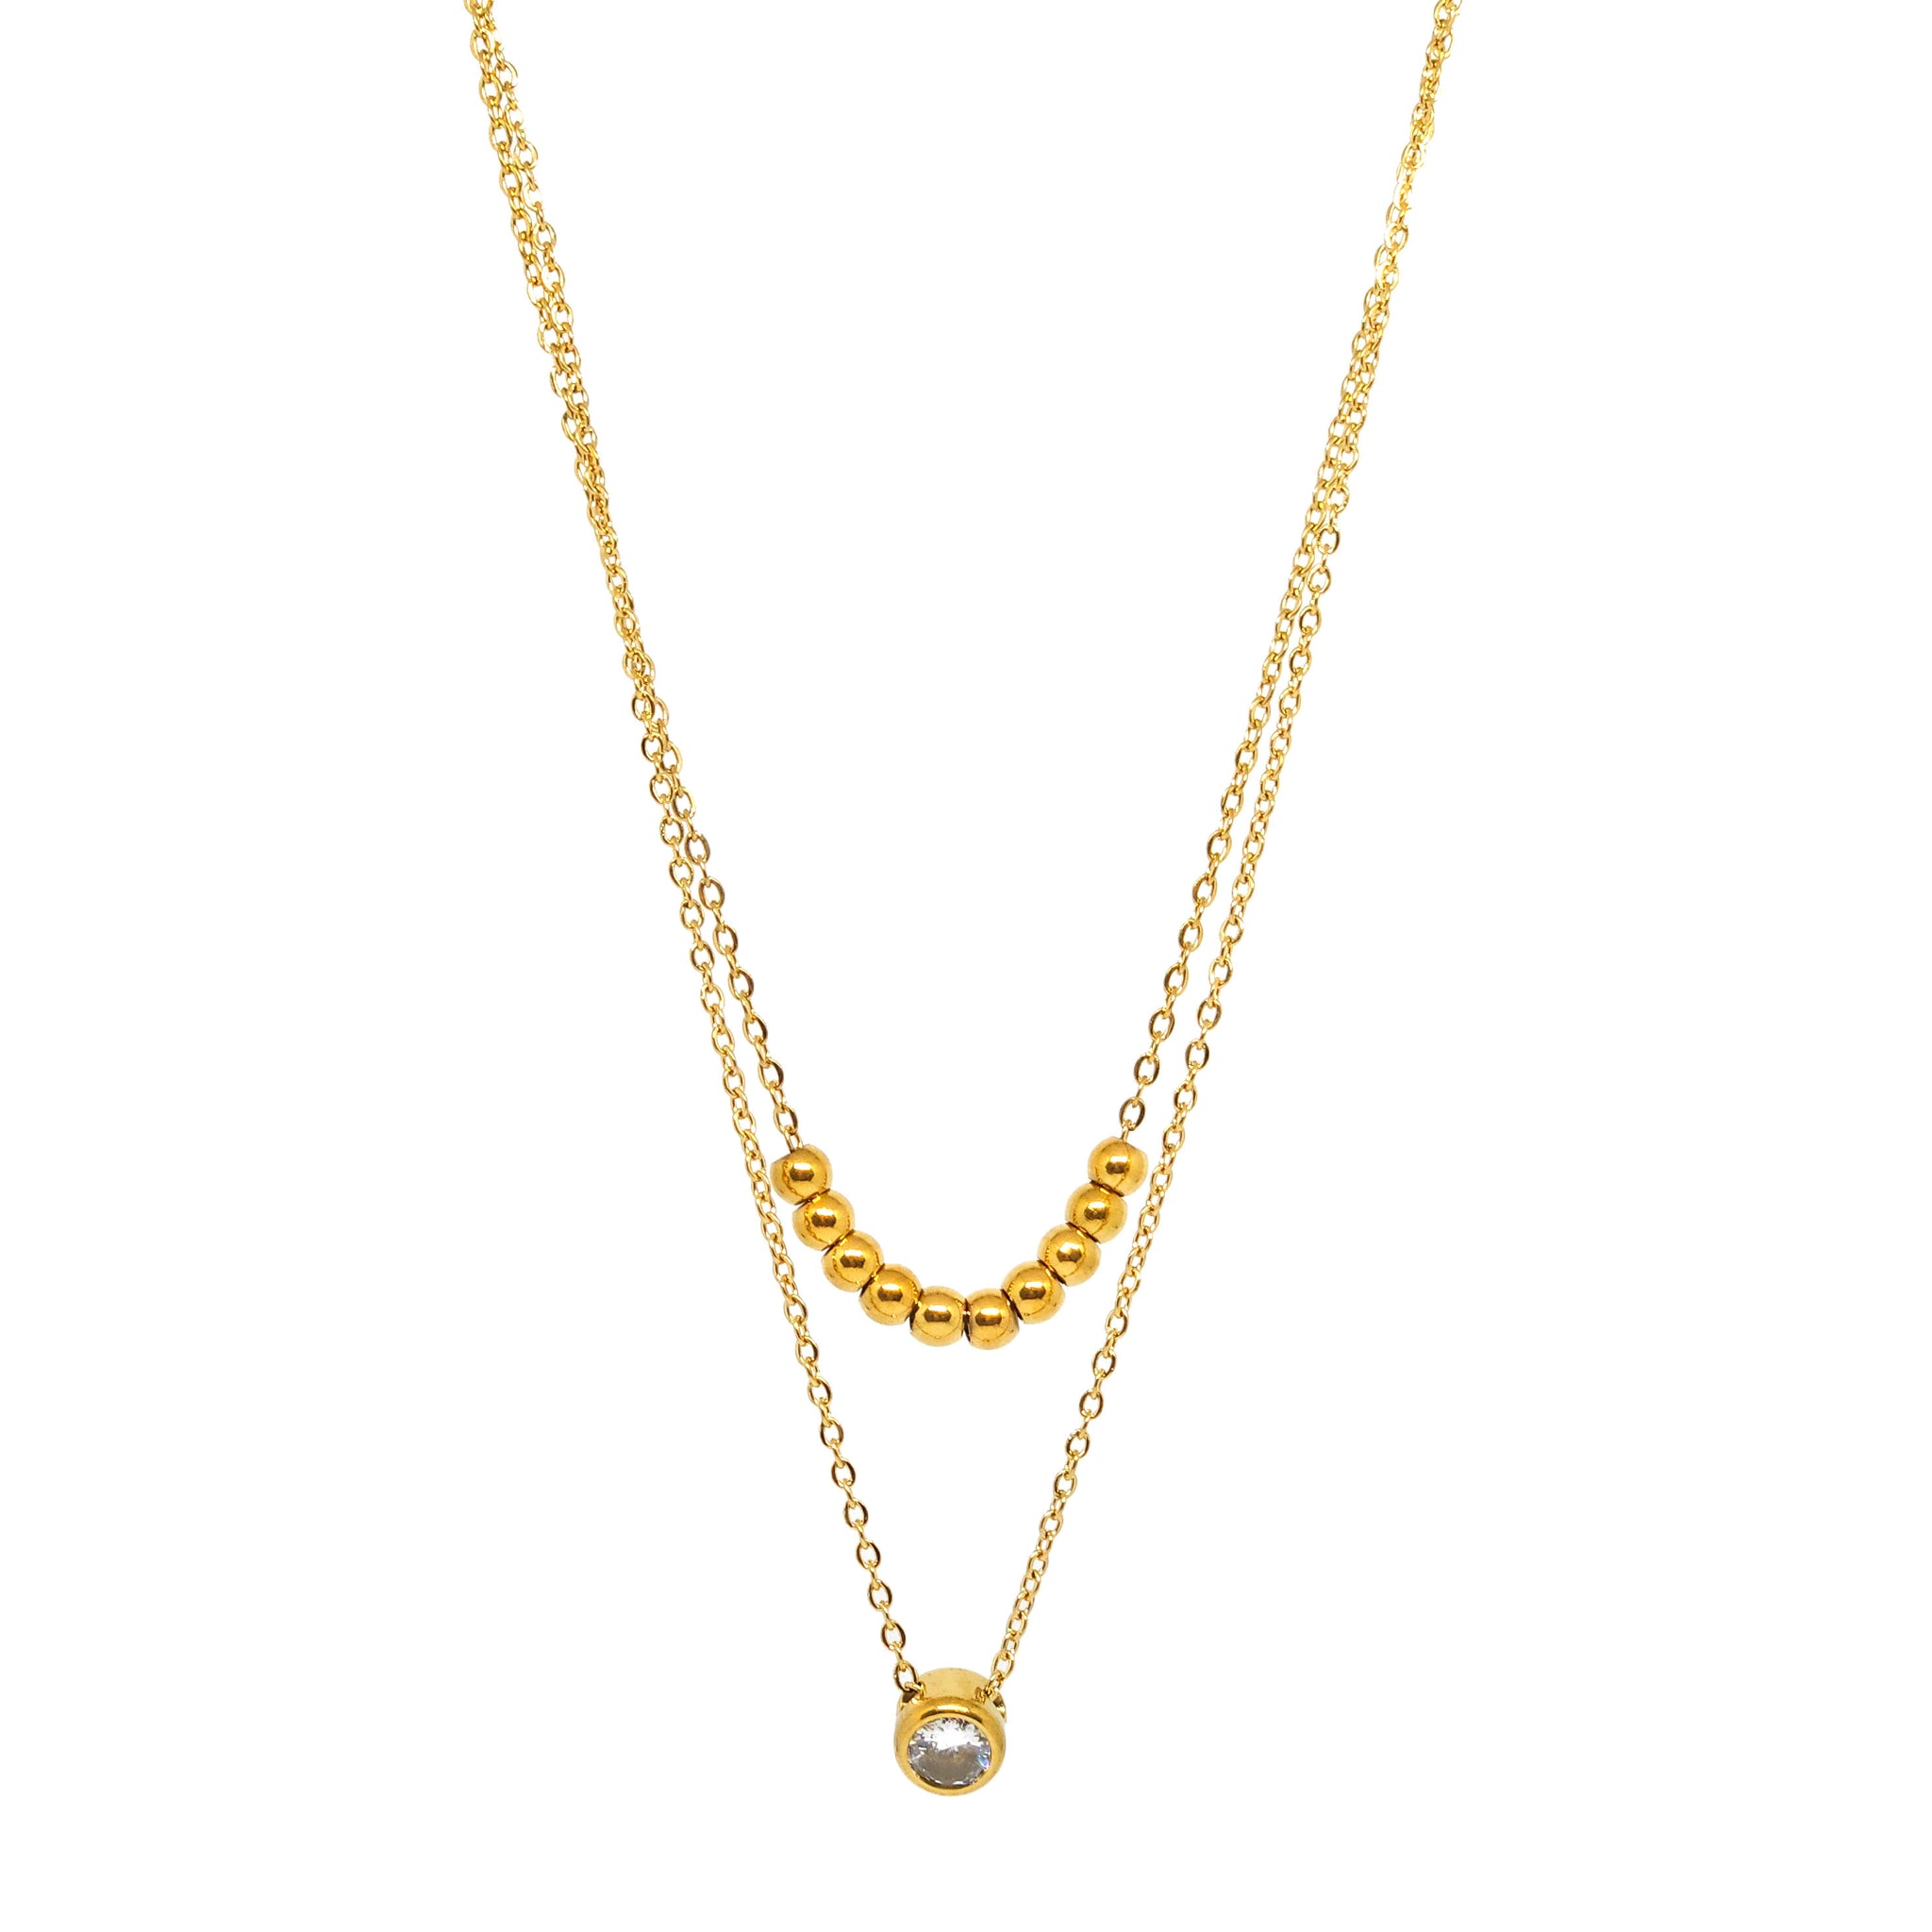 ESN 8171: Jessica All IPG 9-Ball & Enclosed Cz Double Necklace